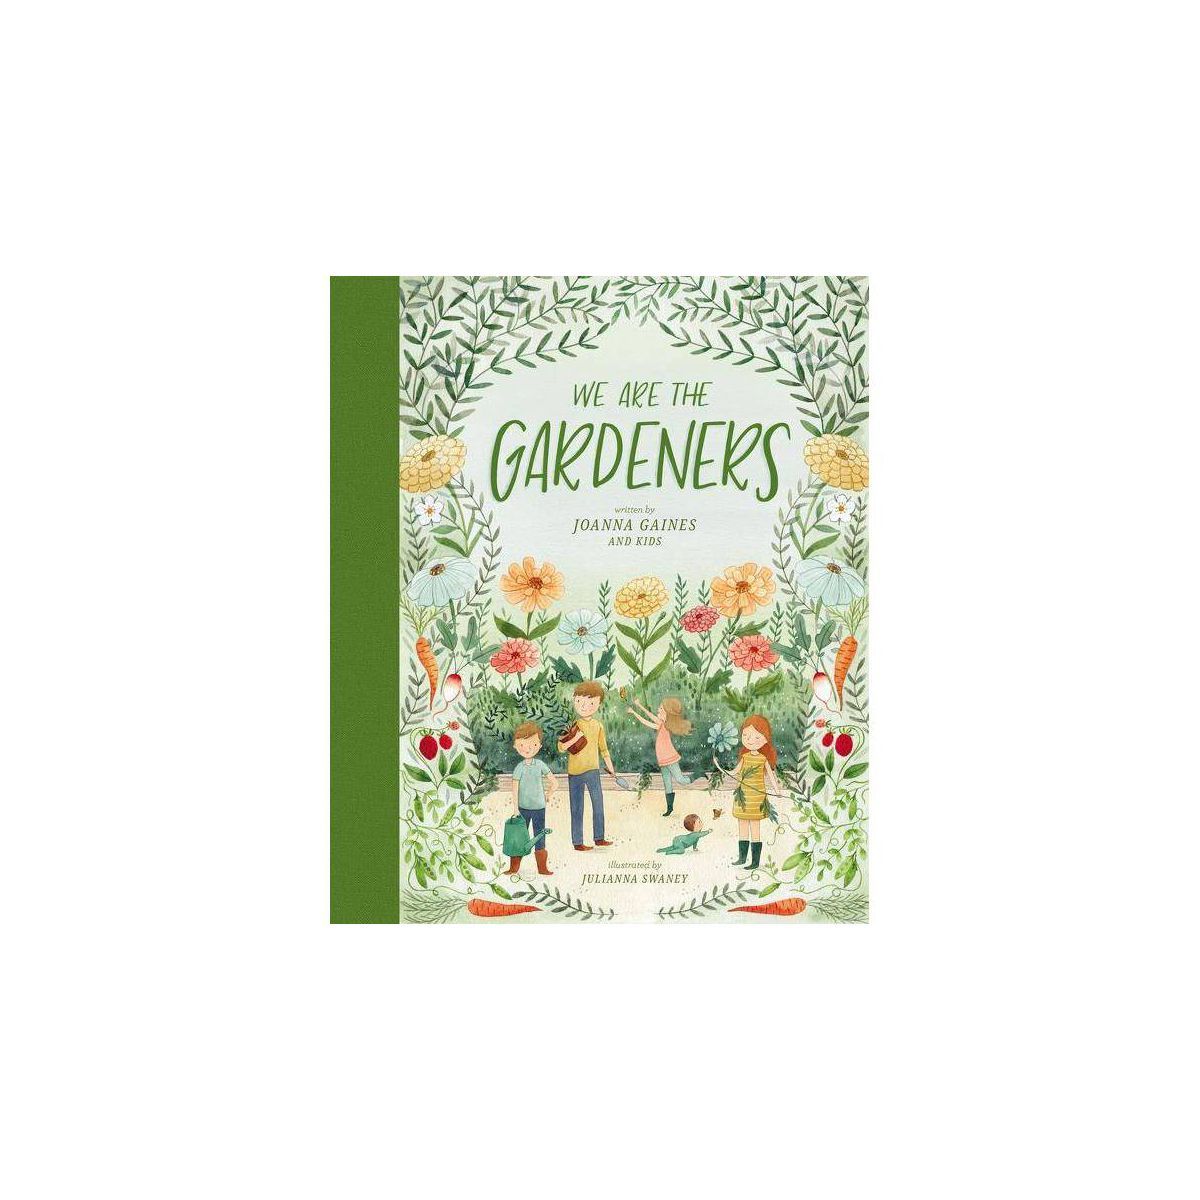 We Are the Gardeners (Hardcover) - by Joanna Gaines and Julianna Swaney | Target